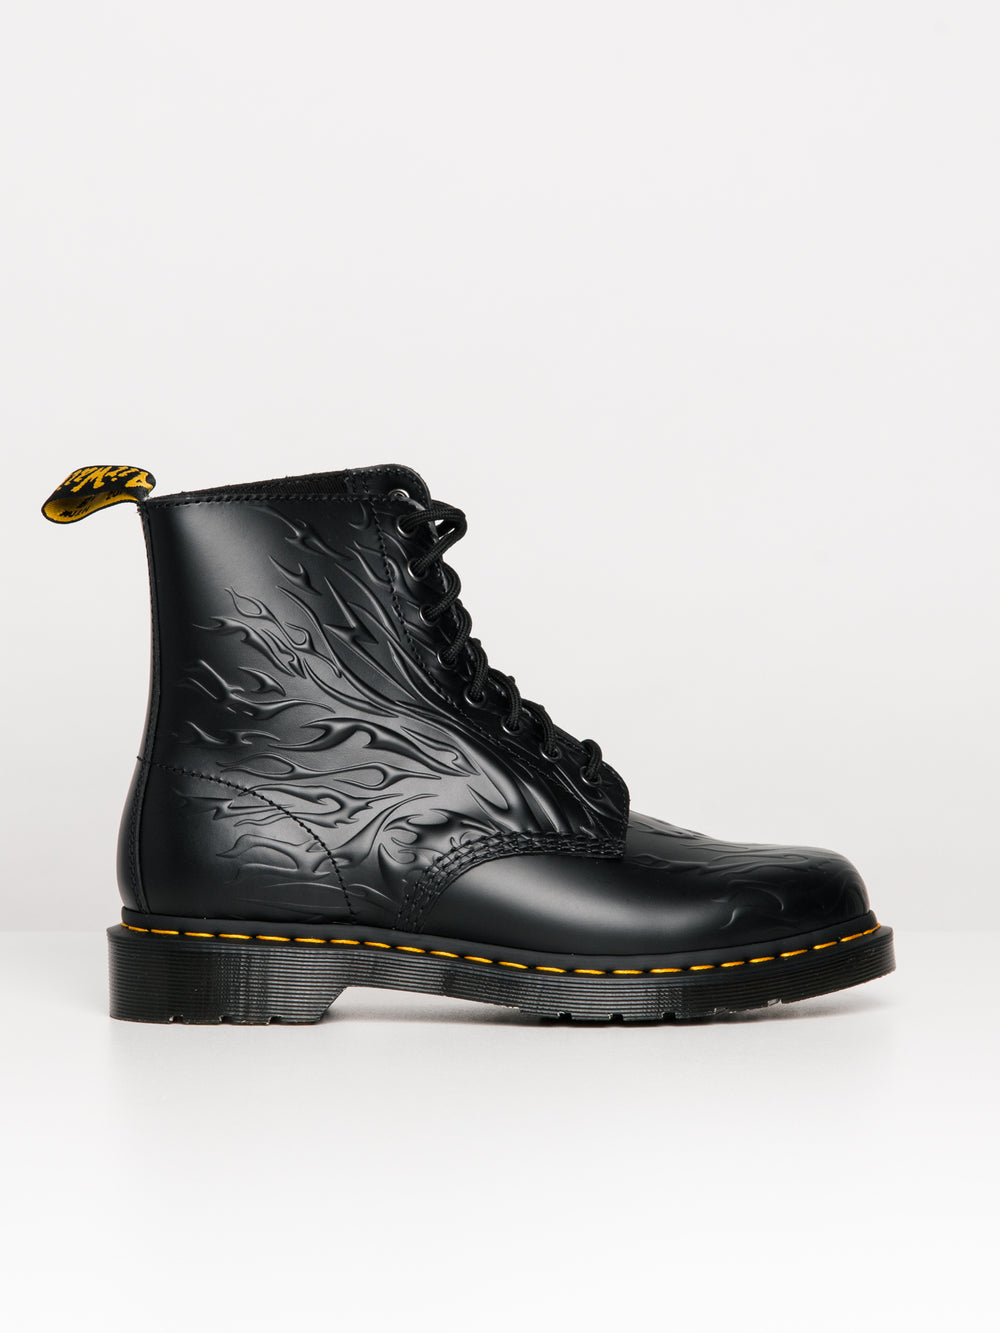 MENS DR MARTENS 1460 FLAMES SMOOTH BLACK BOOT - CLEARANCE